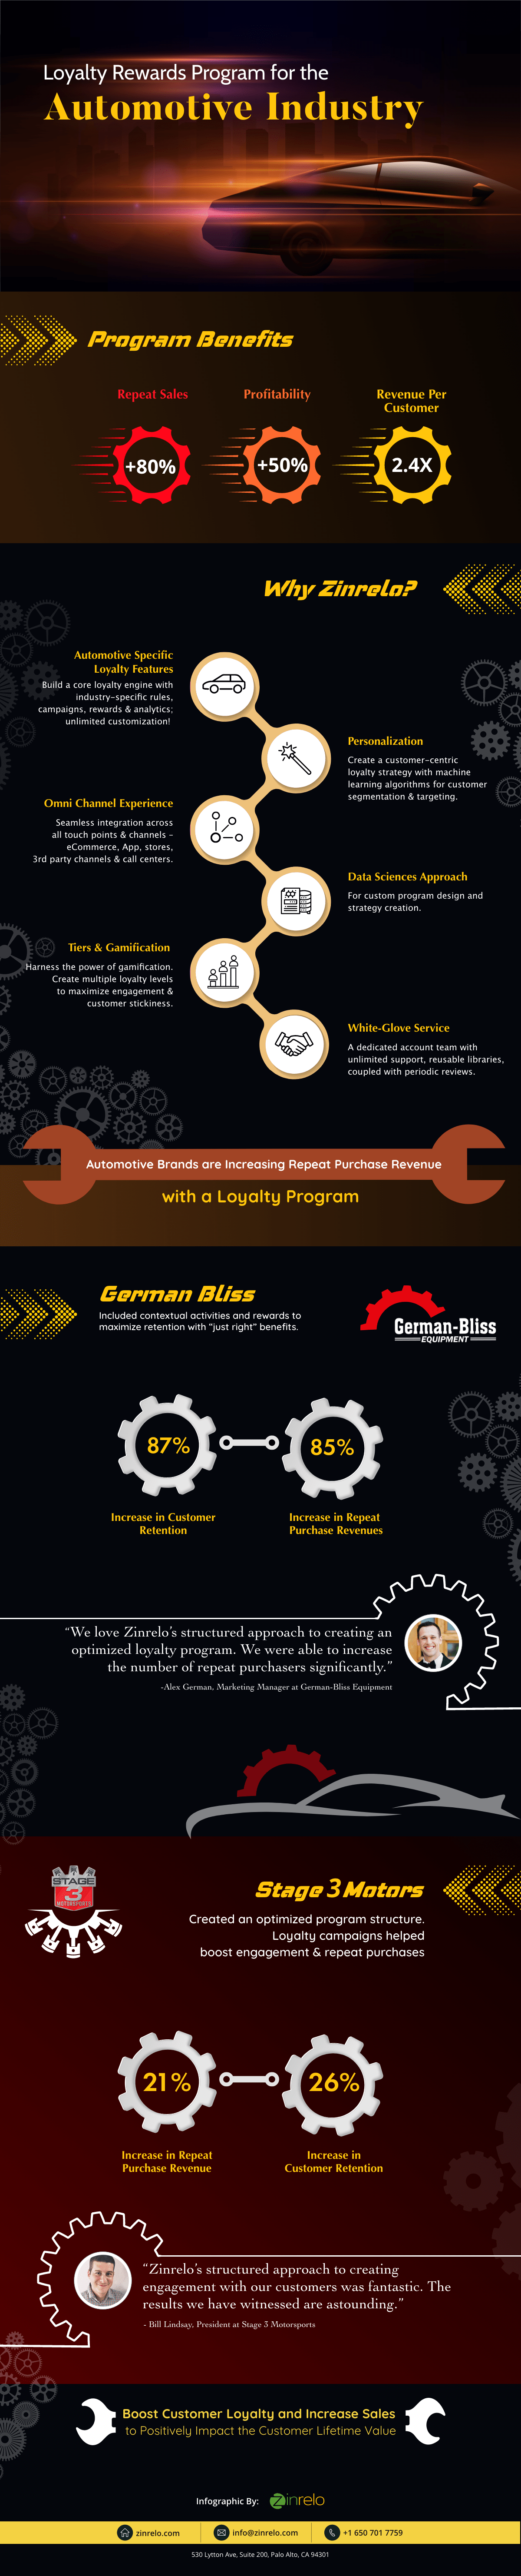 , Loyalty rewards program for the automotive industry infographic